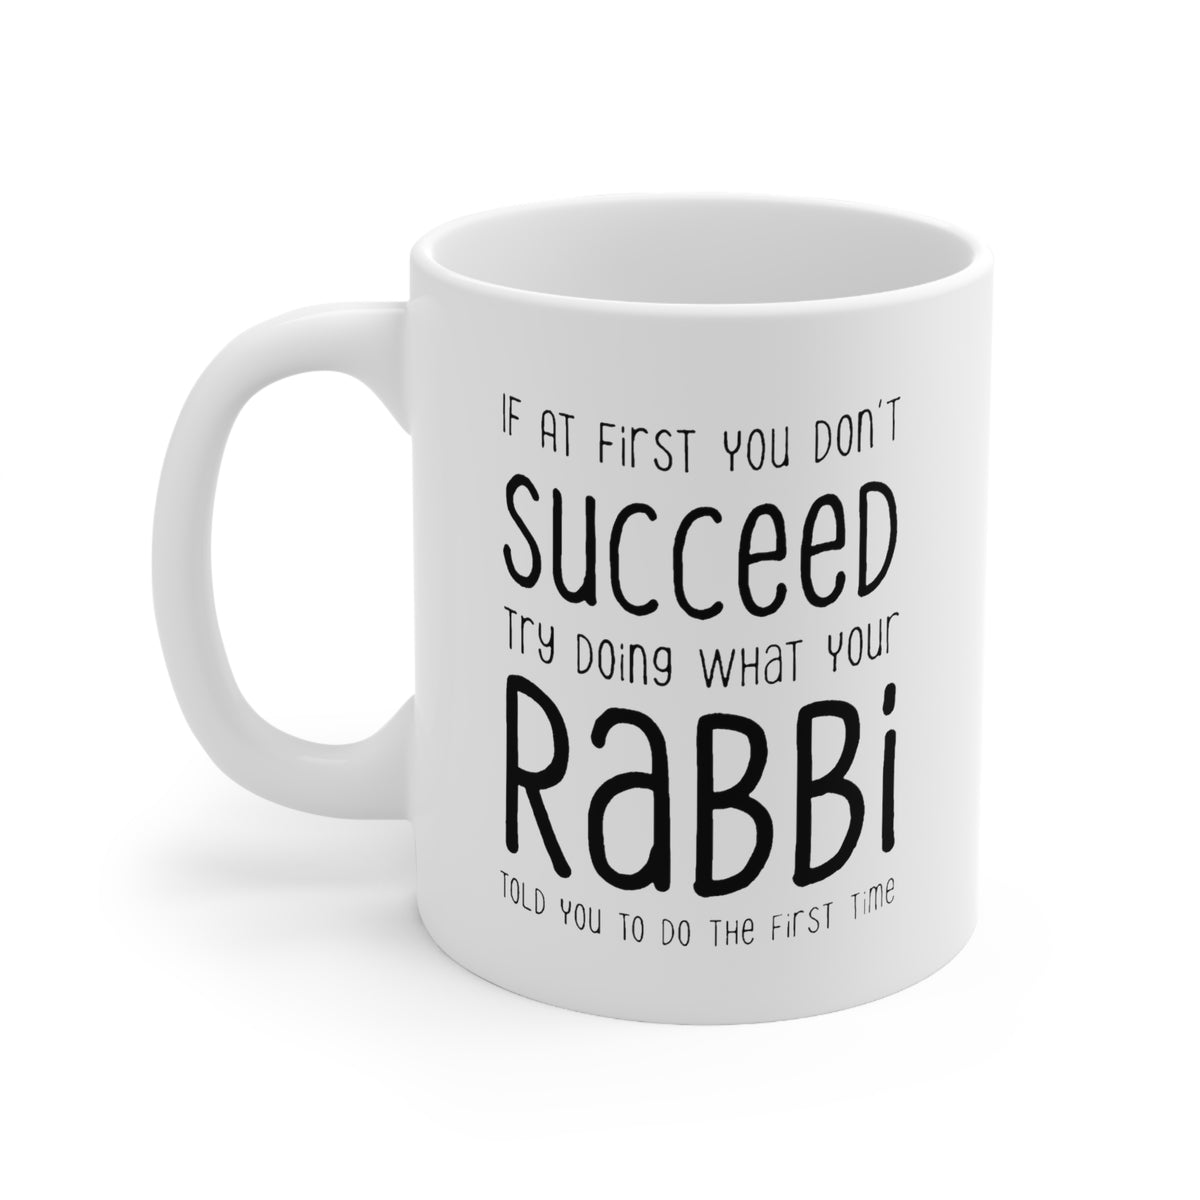 Rabbi Coffee Mug - Doing What Your Rabbi Told You - Funny Sarcasm Gifts for Men and Women